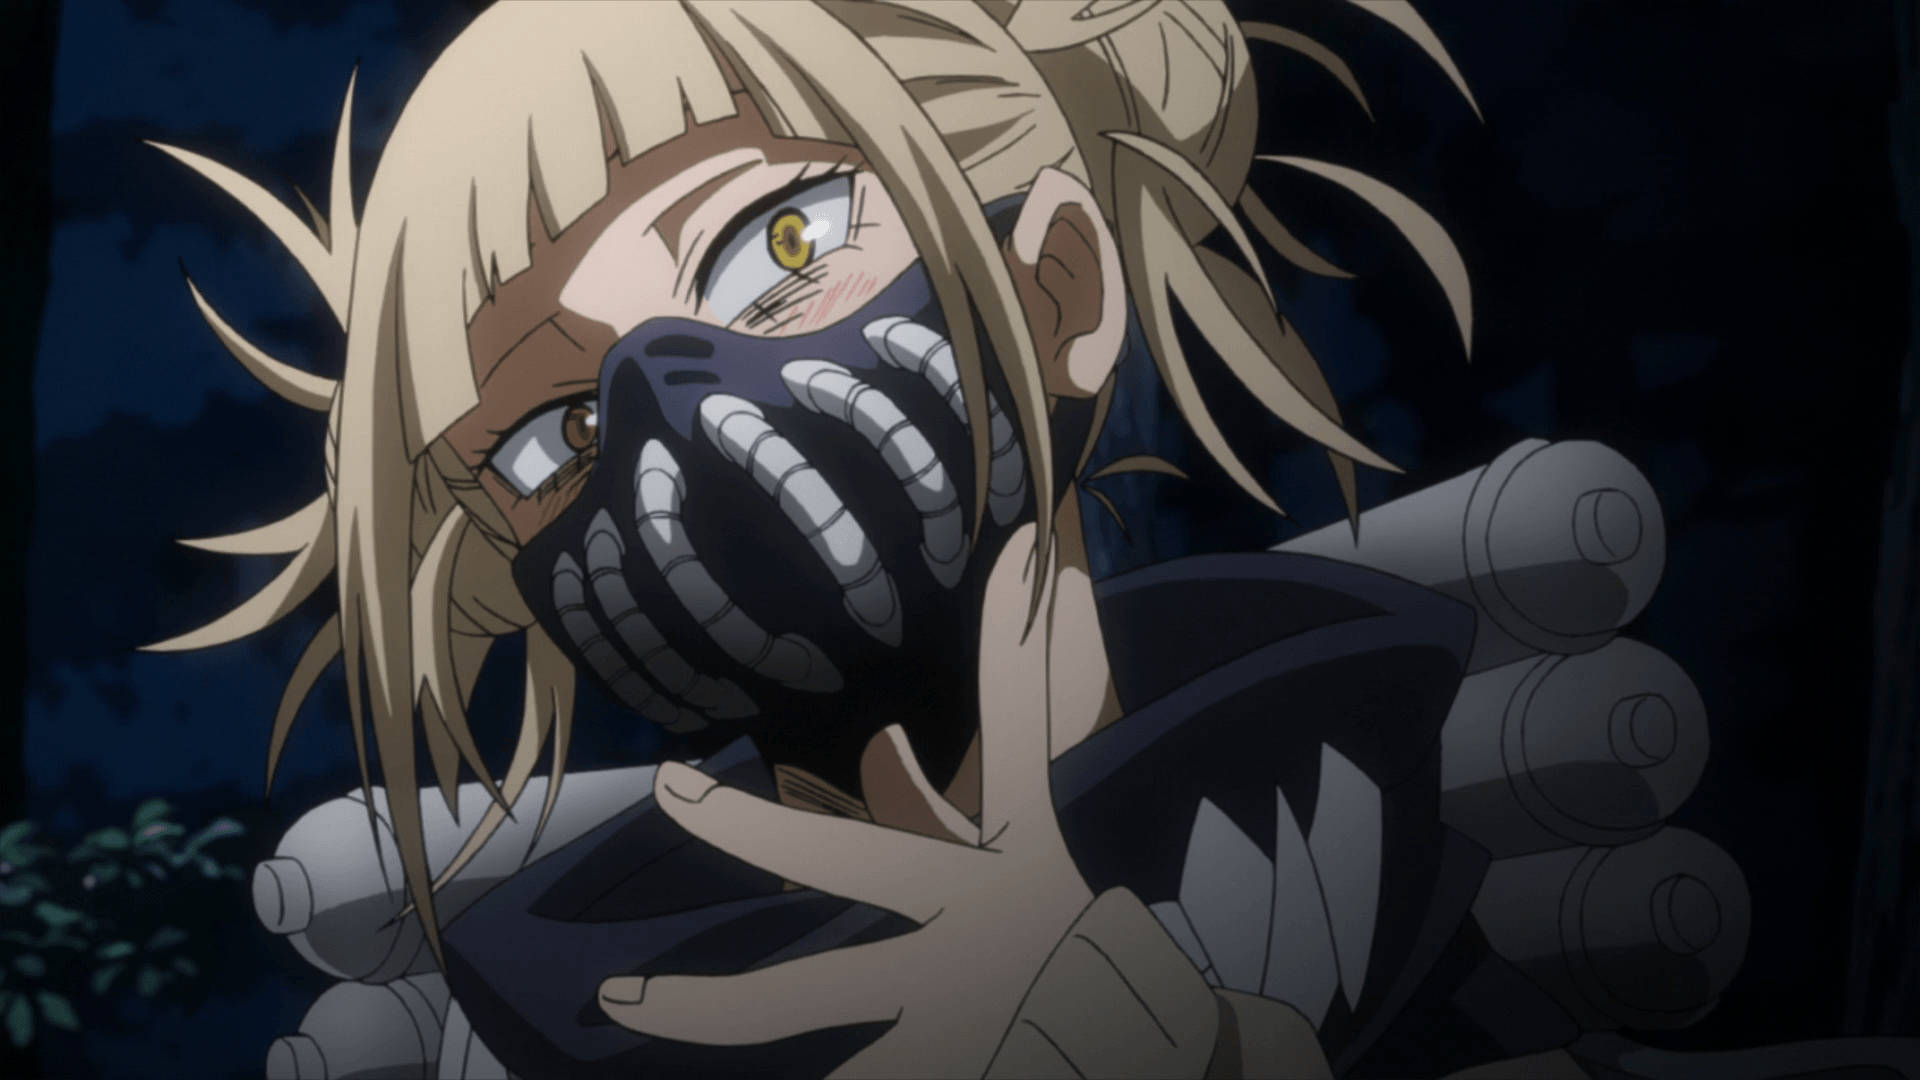 Himiko Toga With A Mask Wallpaper